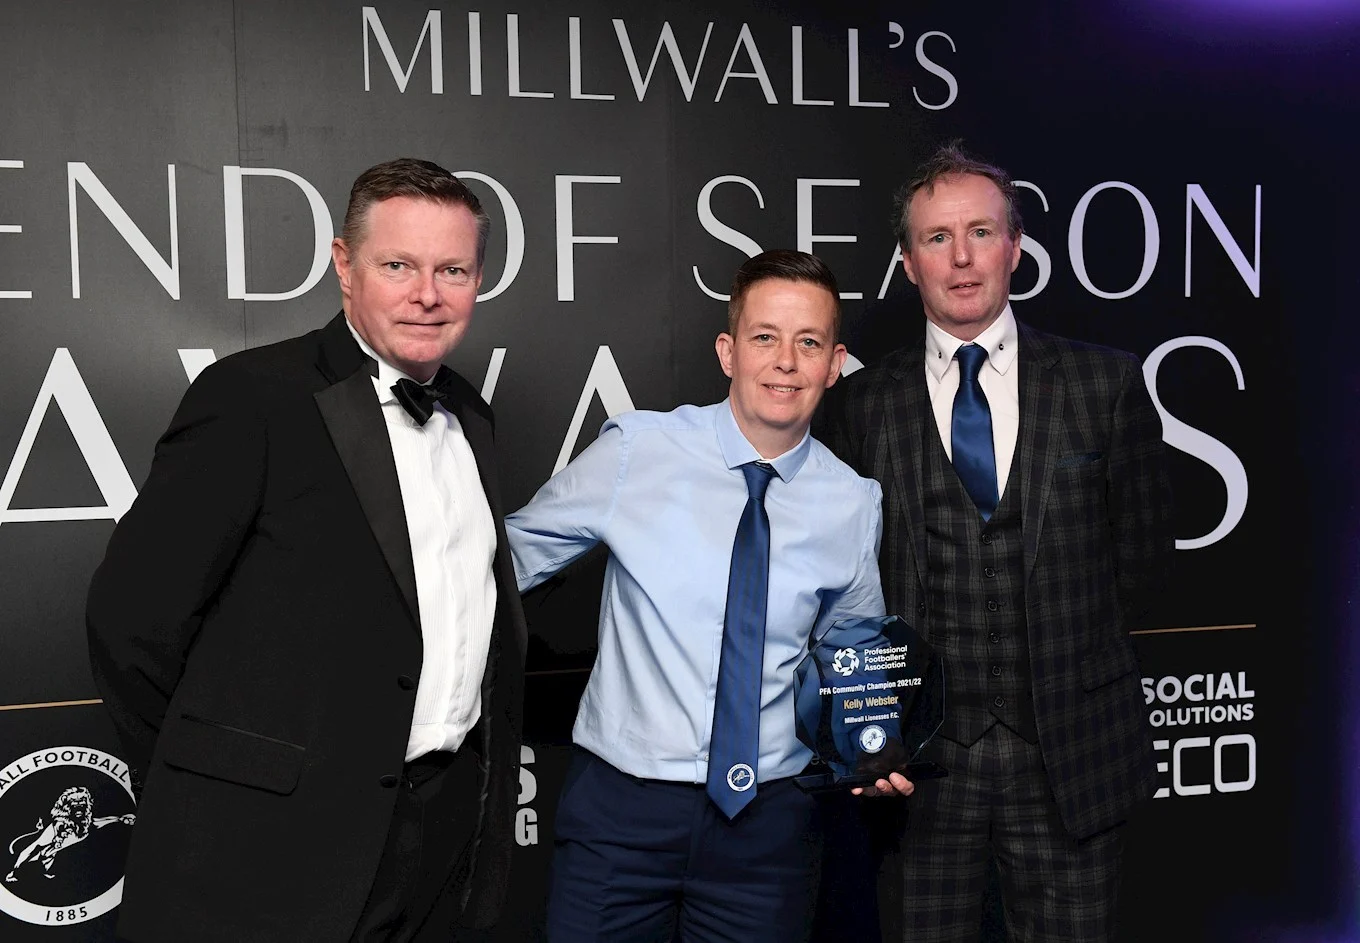 MILLWALL FOOD BANK FOUNDER WINS THIRD ‘COMMUNITY’ AWARD BUT WARNS OF SPIRALLING COST OF LIVING CRISIS